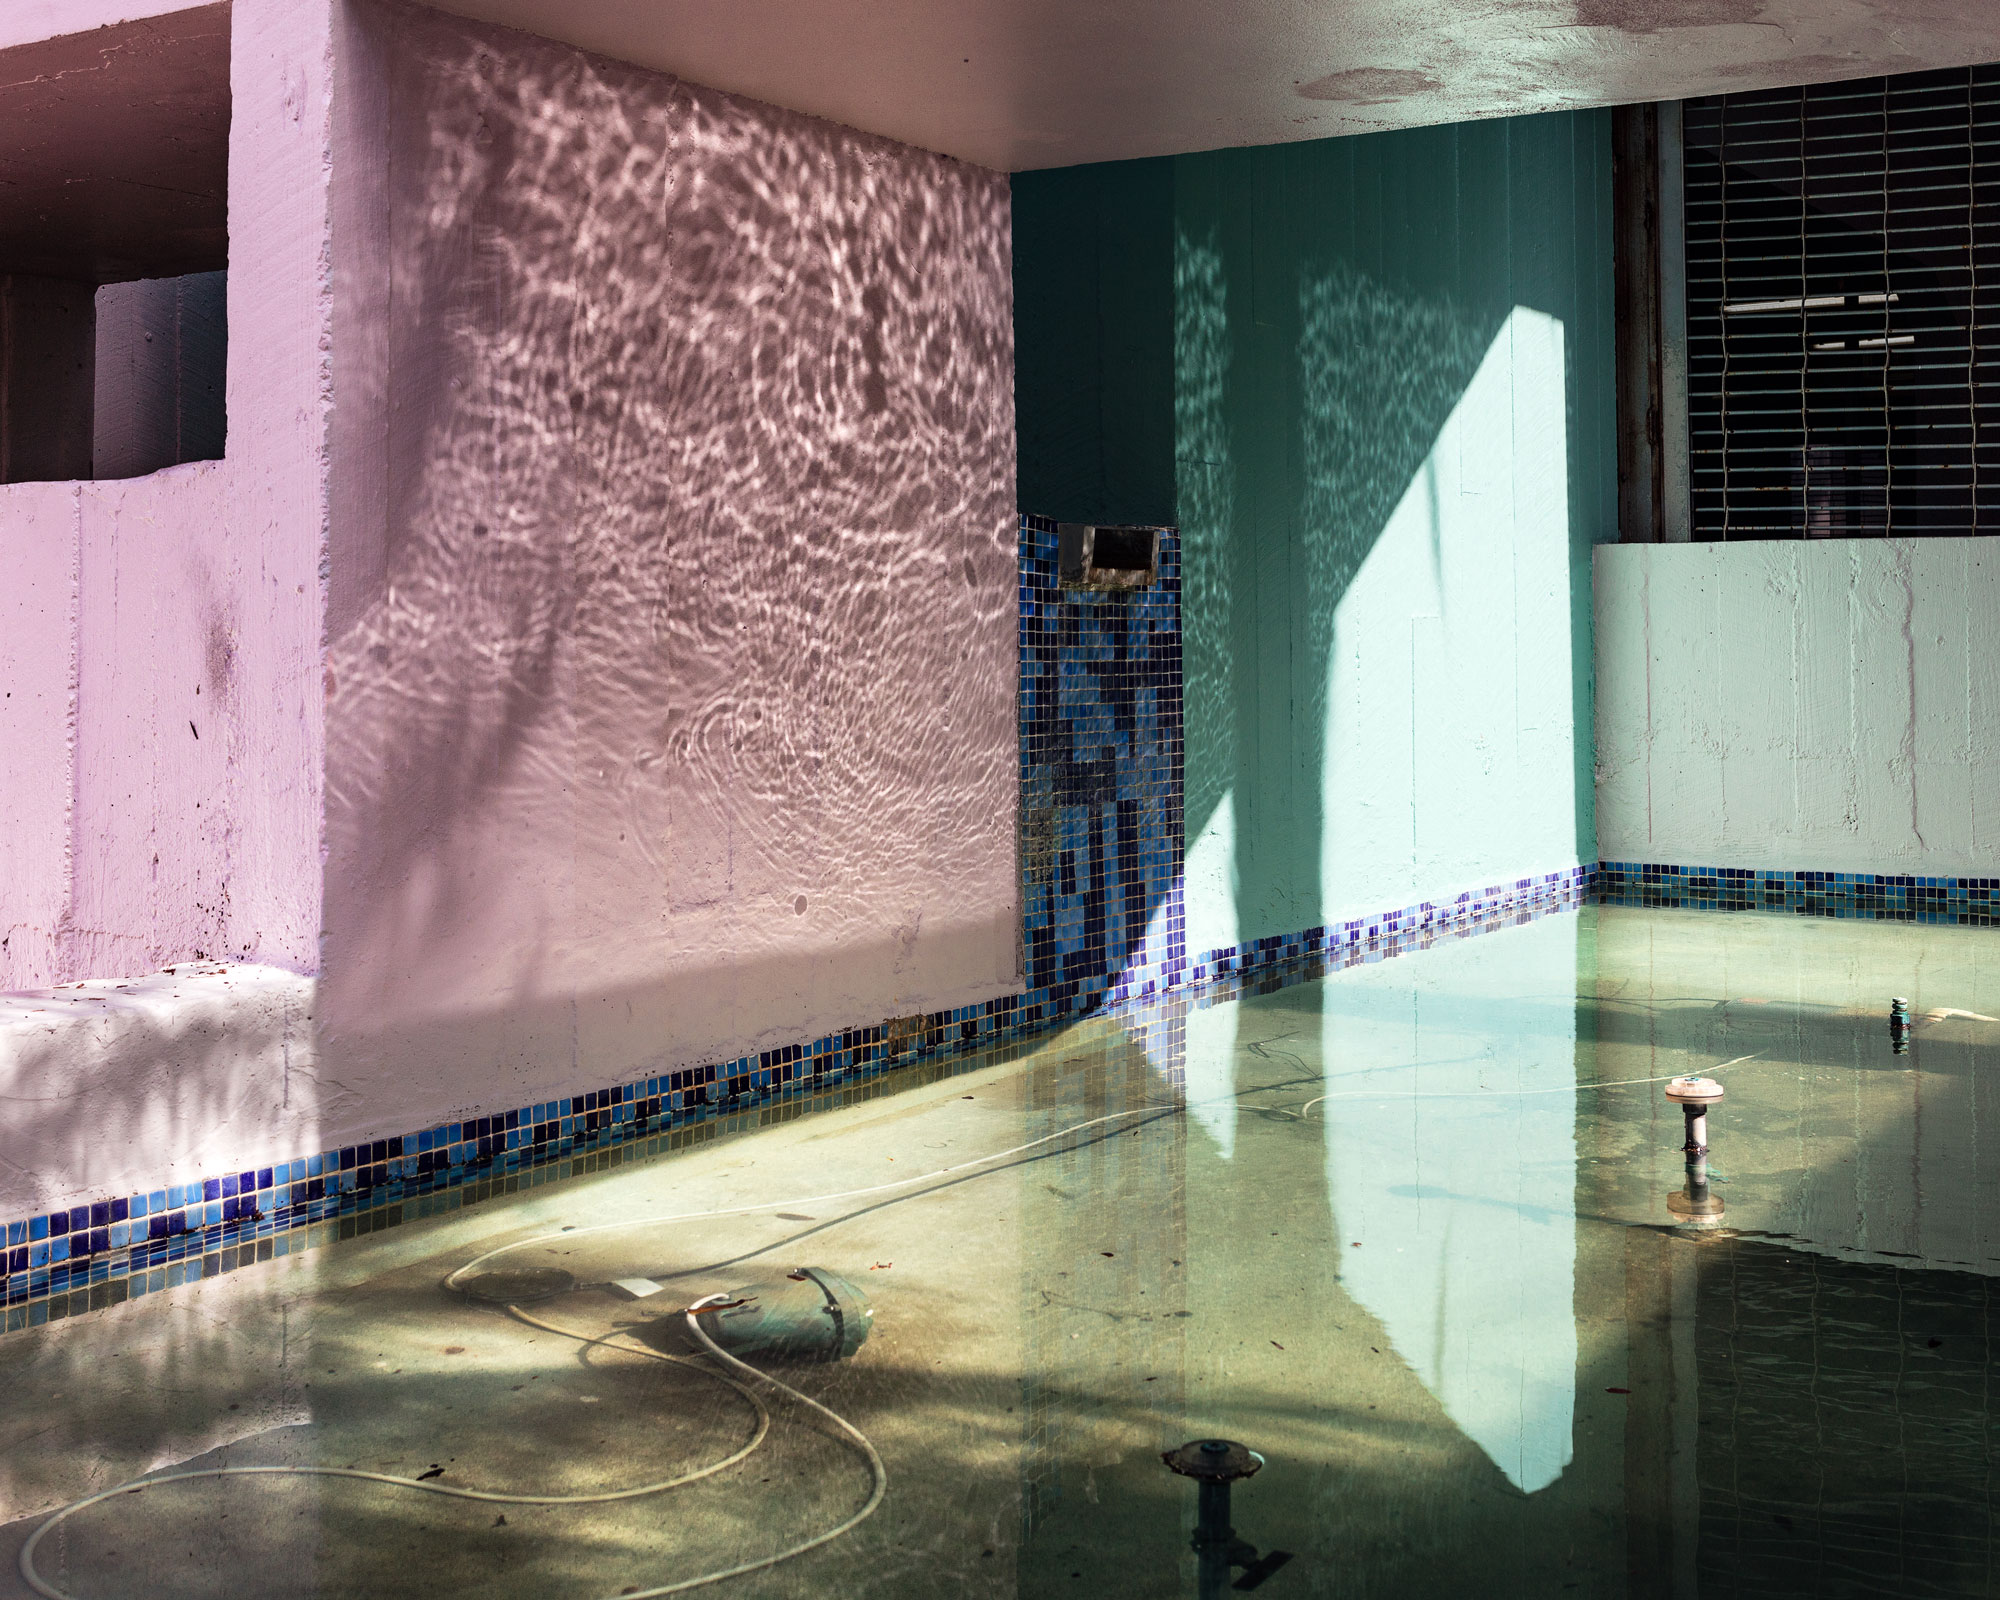 Photograph of abandoned fountain, water reflecting on pastel-colored walls.